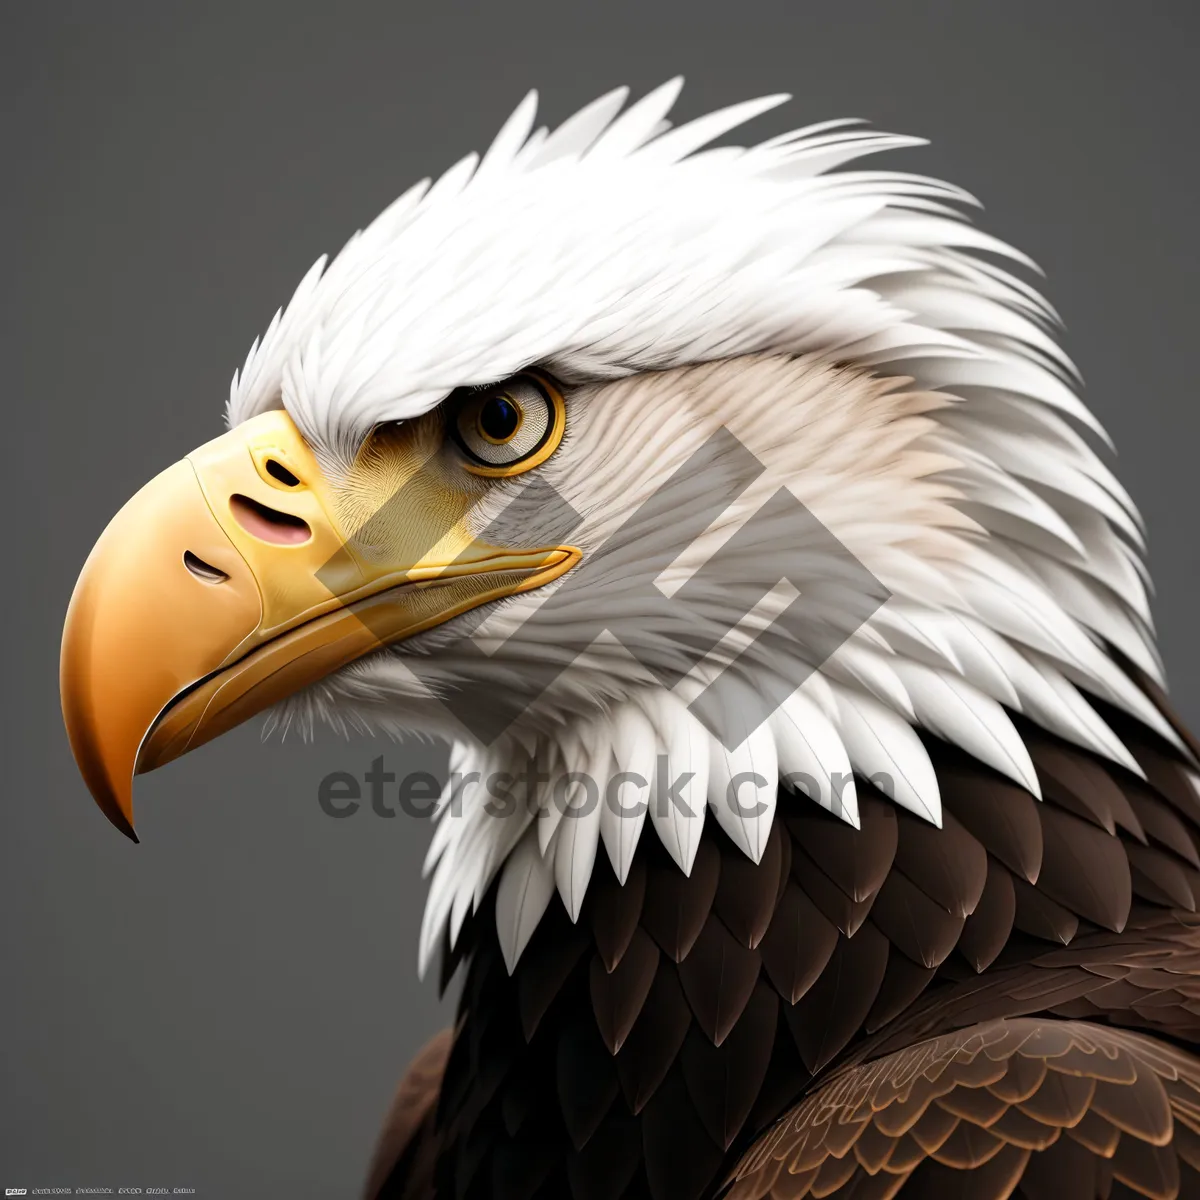 Picture of Yellow-Feathered Bald Eagle Portrait in Wild Sea